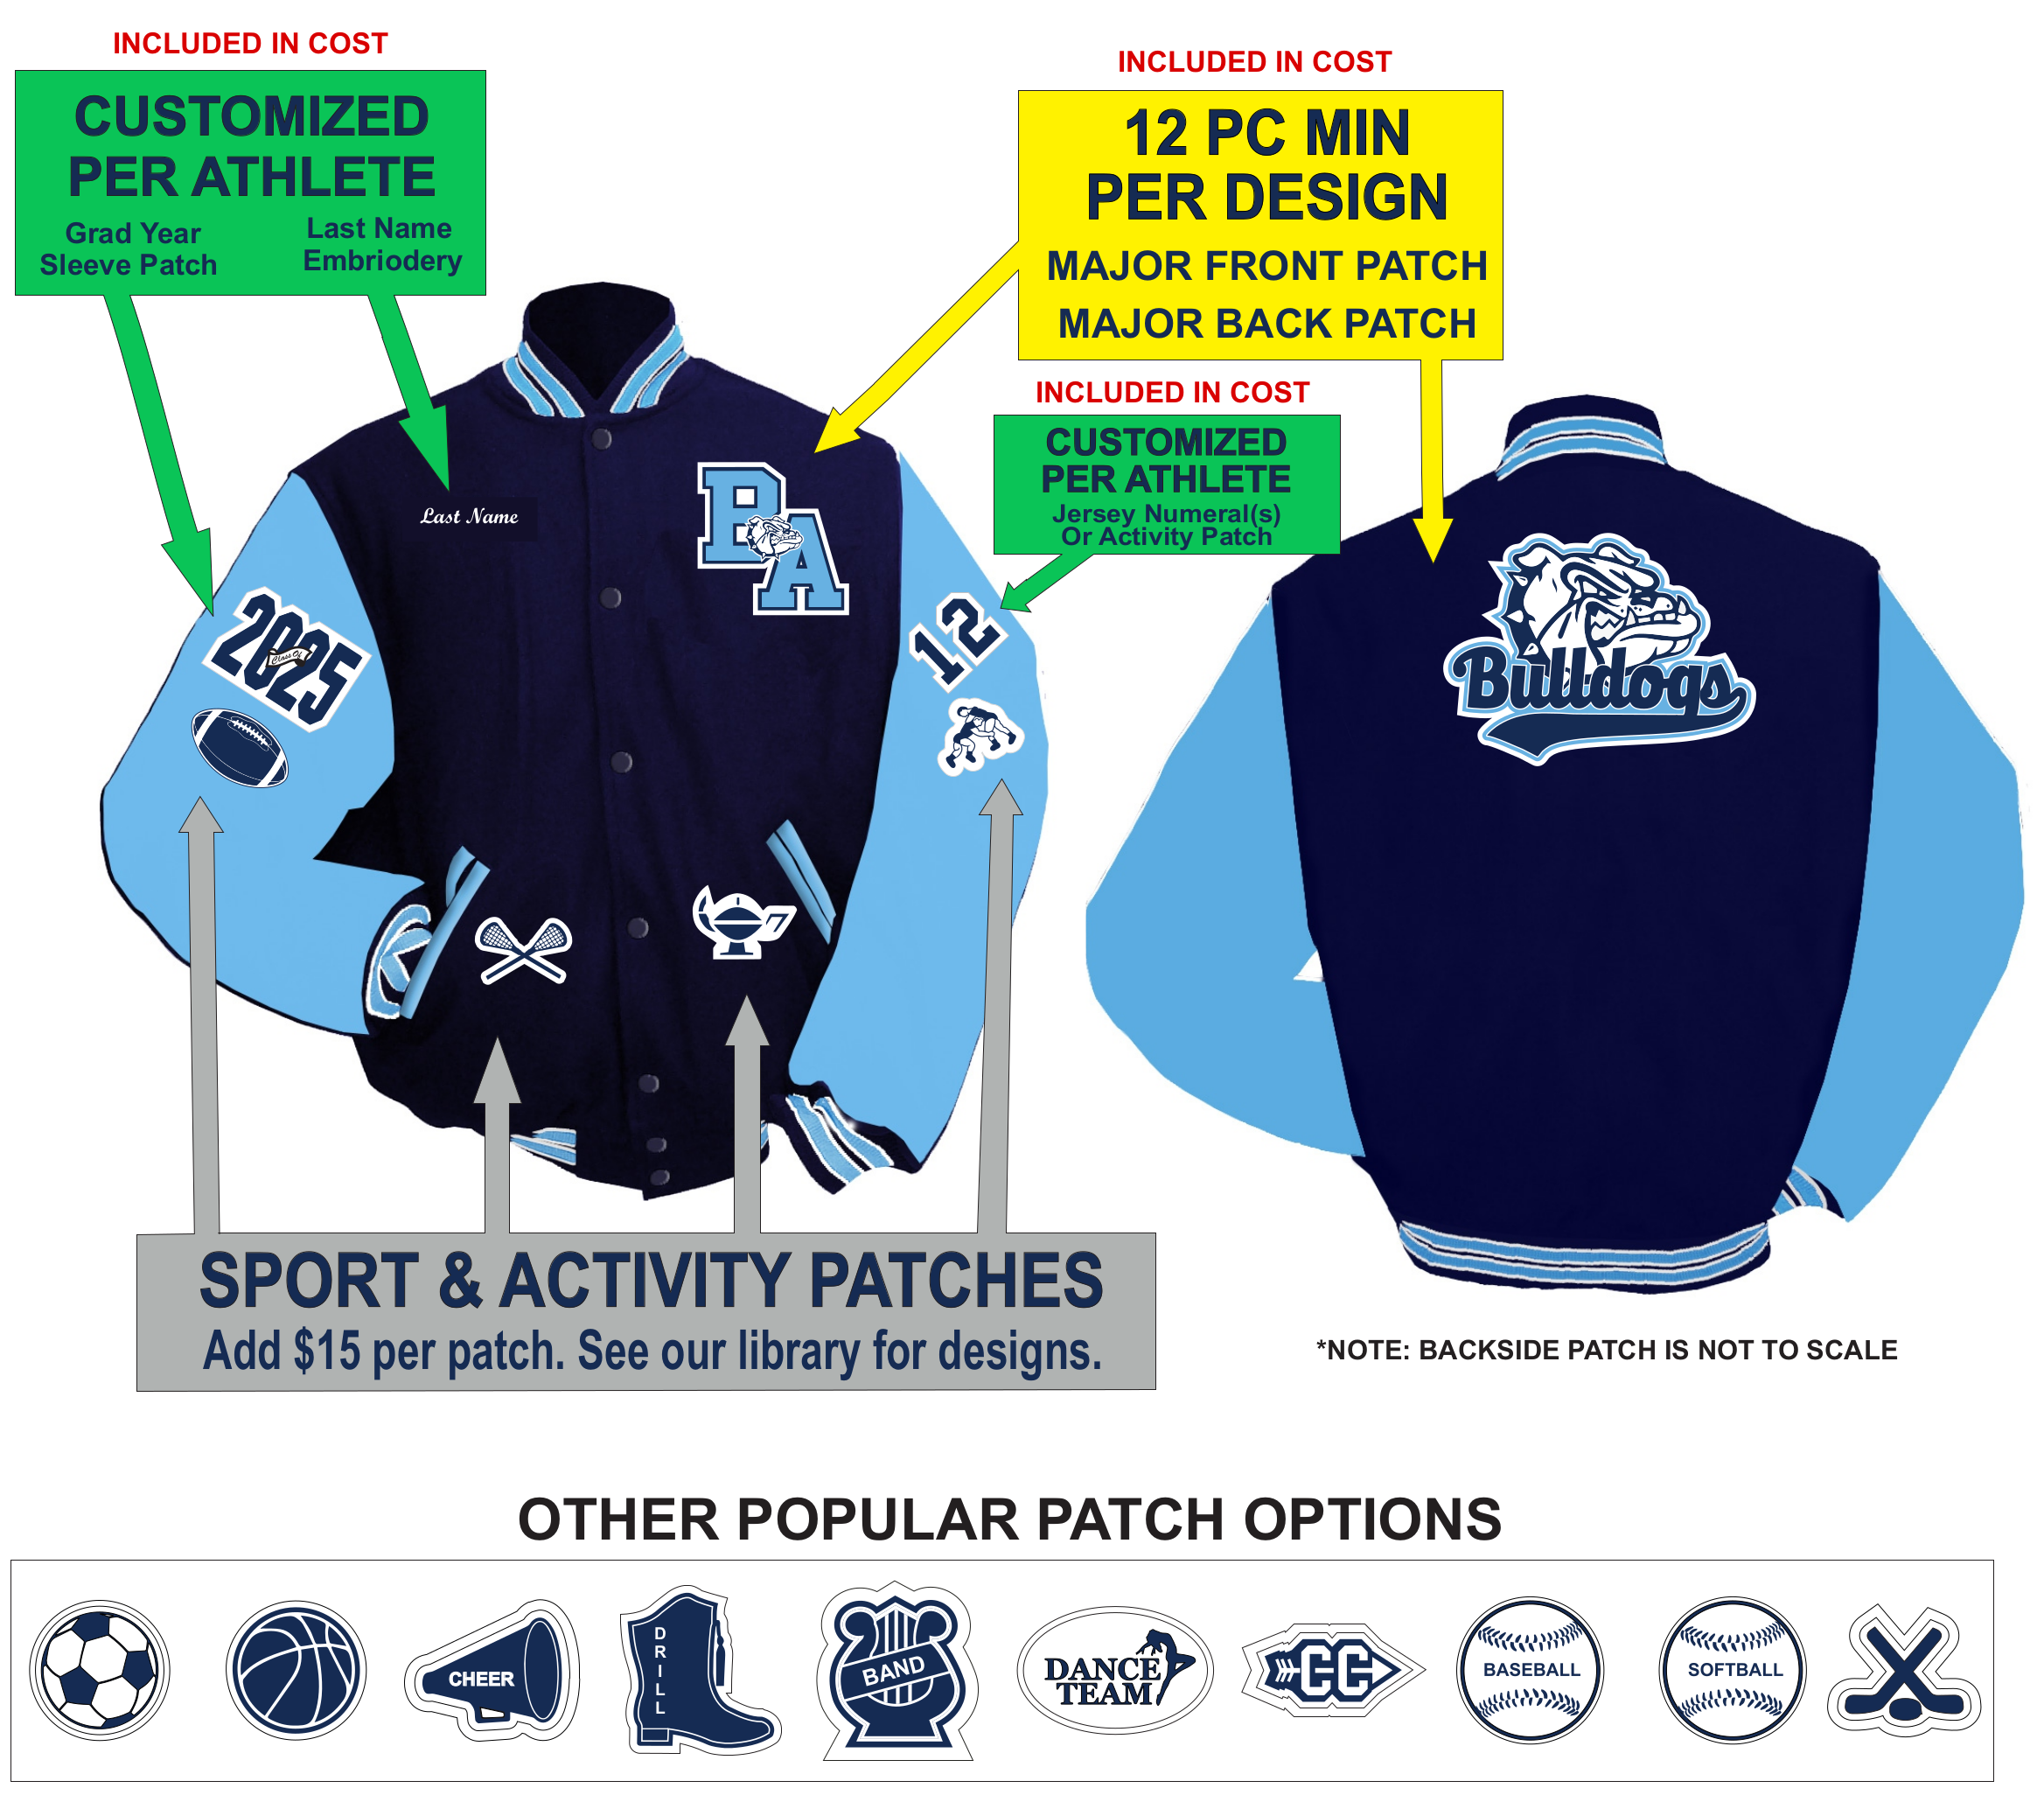 Image of jackets and patches